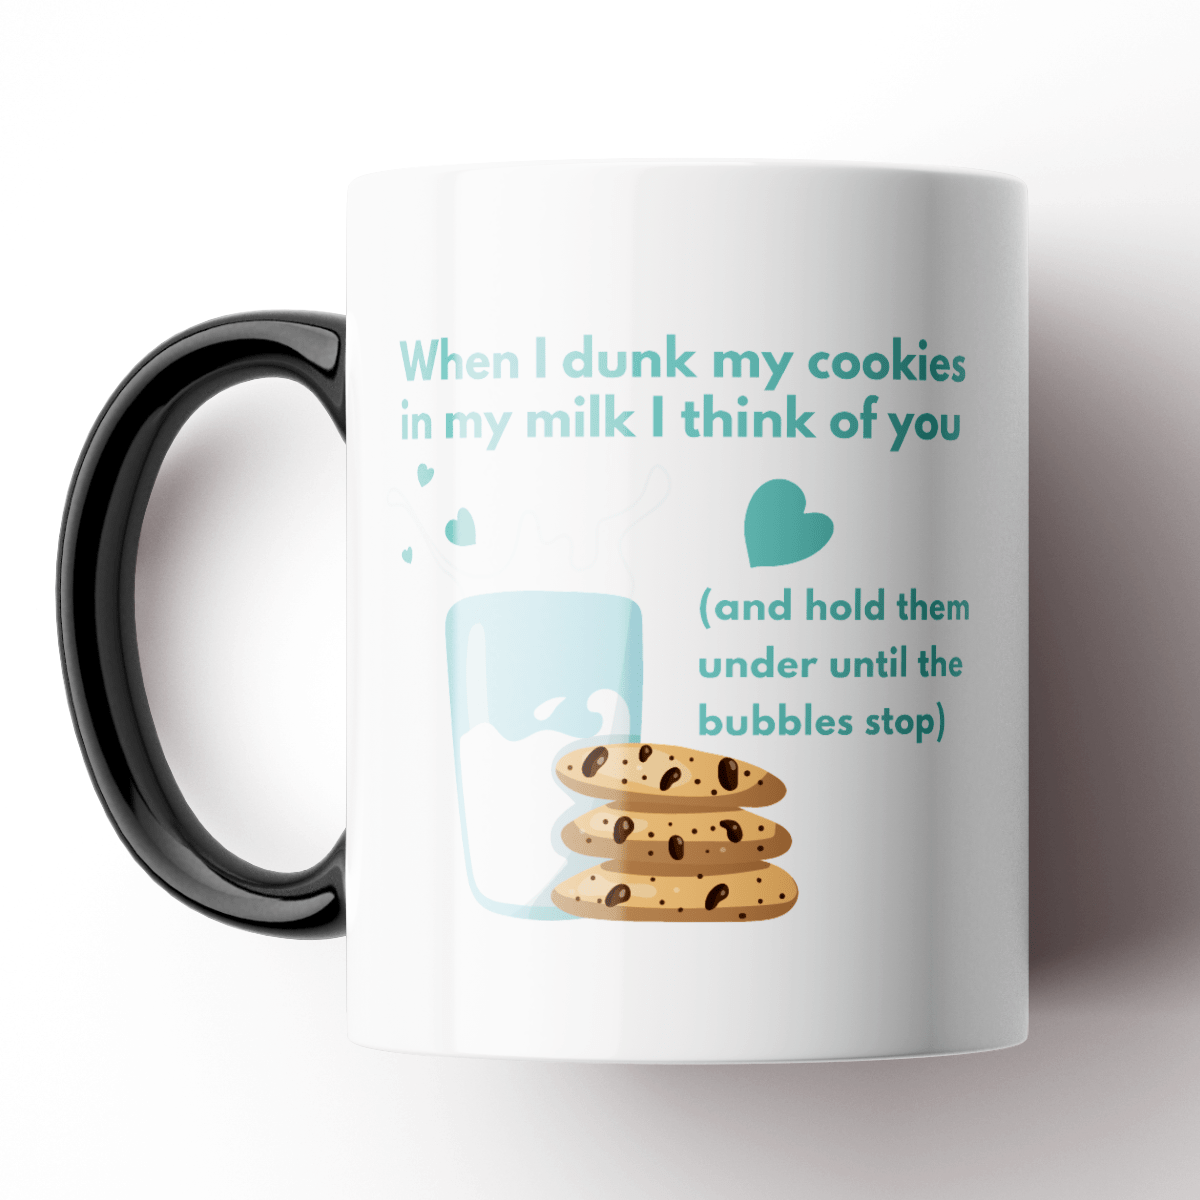 https://cdn.shopify.com/s/files/1/2423/8037/products/tigc-the-inappropriate-gift-co-when-i-dunk-my-cookies-mug-28590979219498_1600x.png?v=1632384763